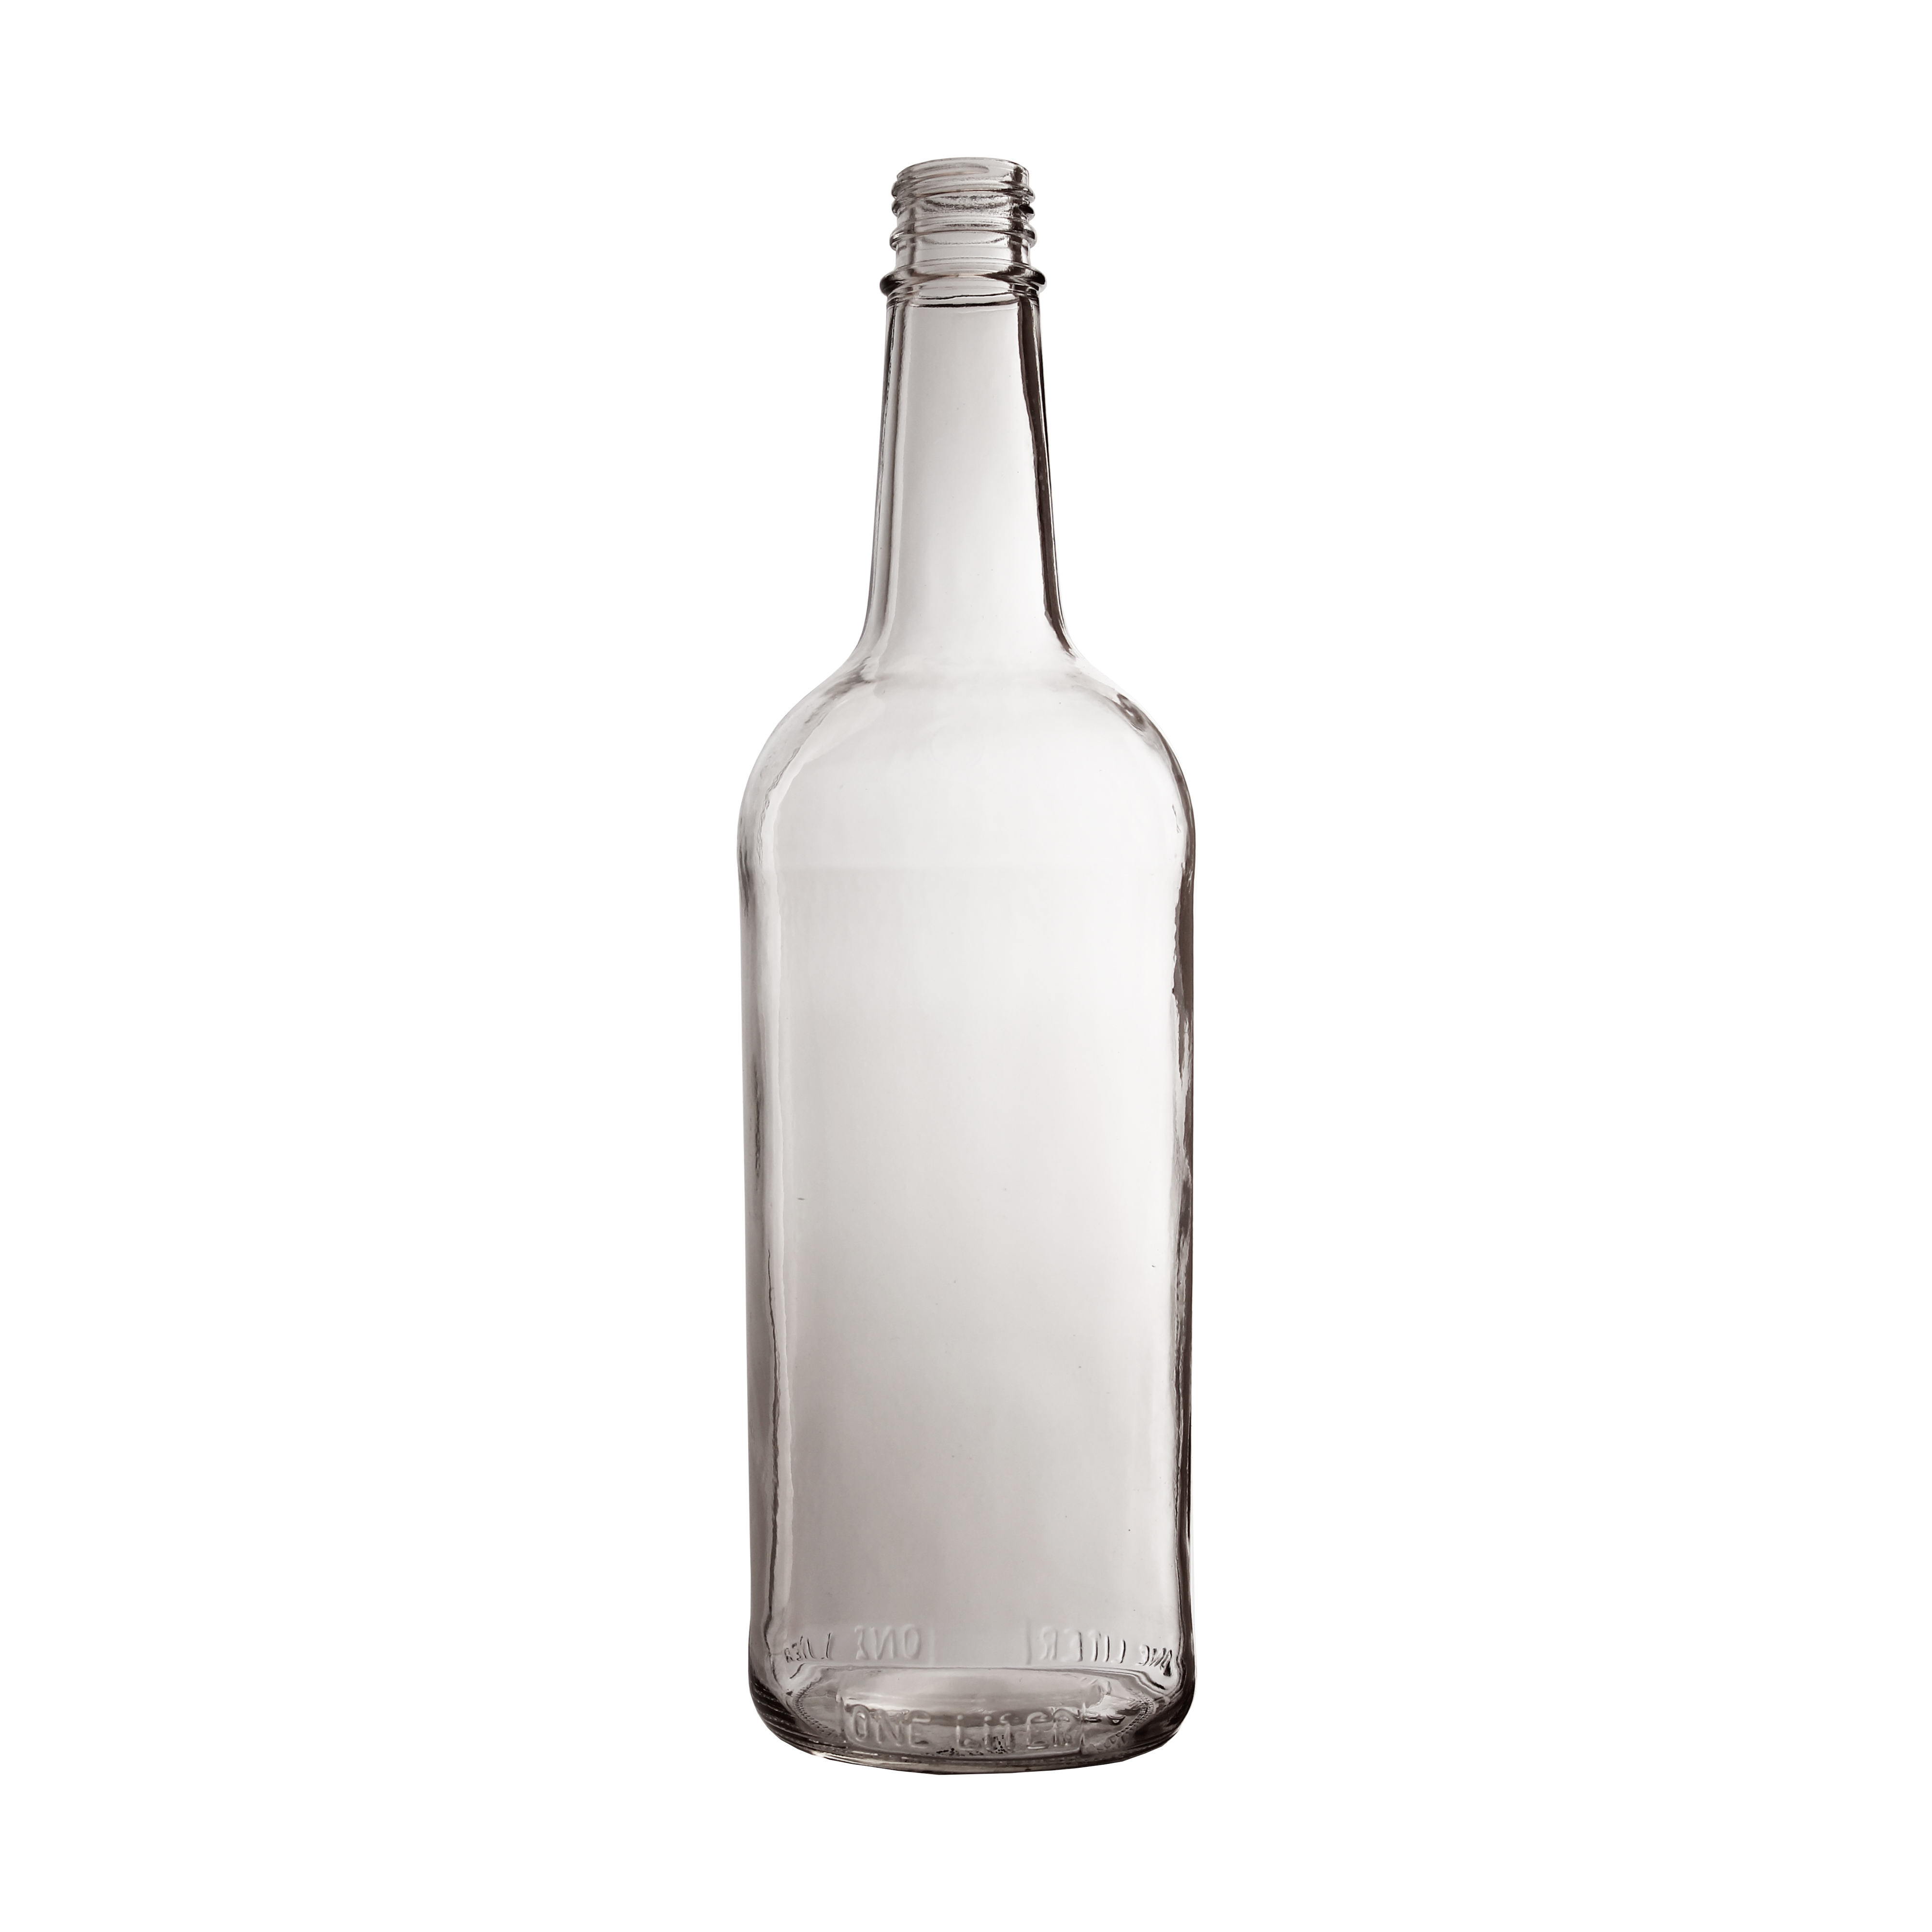 Product categories Glass Bottles : All American Containers